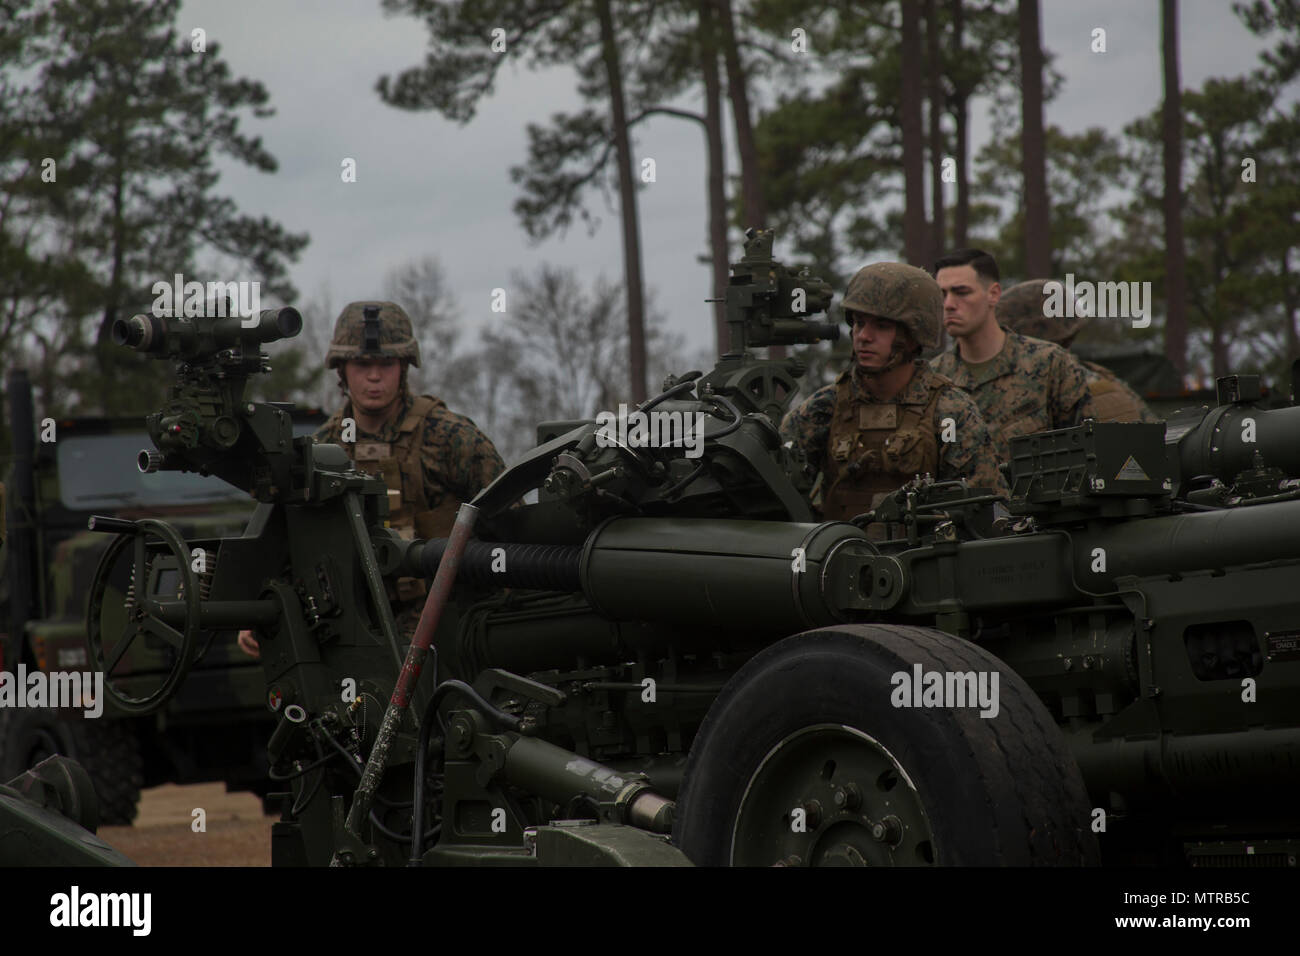 Marines with the Artillery Training School set up an M777A2 towed 155mm howitzer at Camp Lejeune, N.C., Jan. 18, 2017. The howitzer weighs approximately 9,800 pounds and is capable of firing 155mm rounds, which can destroy large enemy targets or illuminate the battlefield to provide support for infantry units. (U.S. Marine Corps photo by Lance Cpl. Juan A Soto-Delgado) Stock Photo